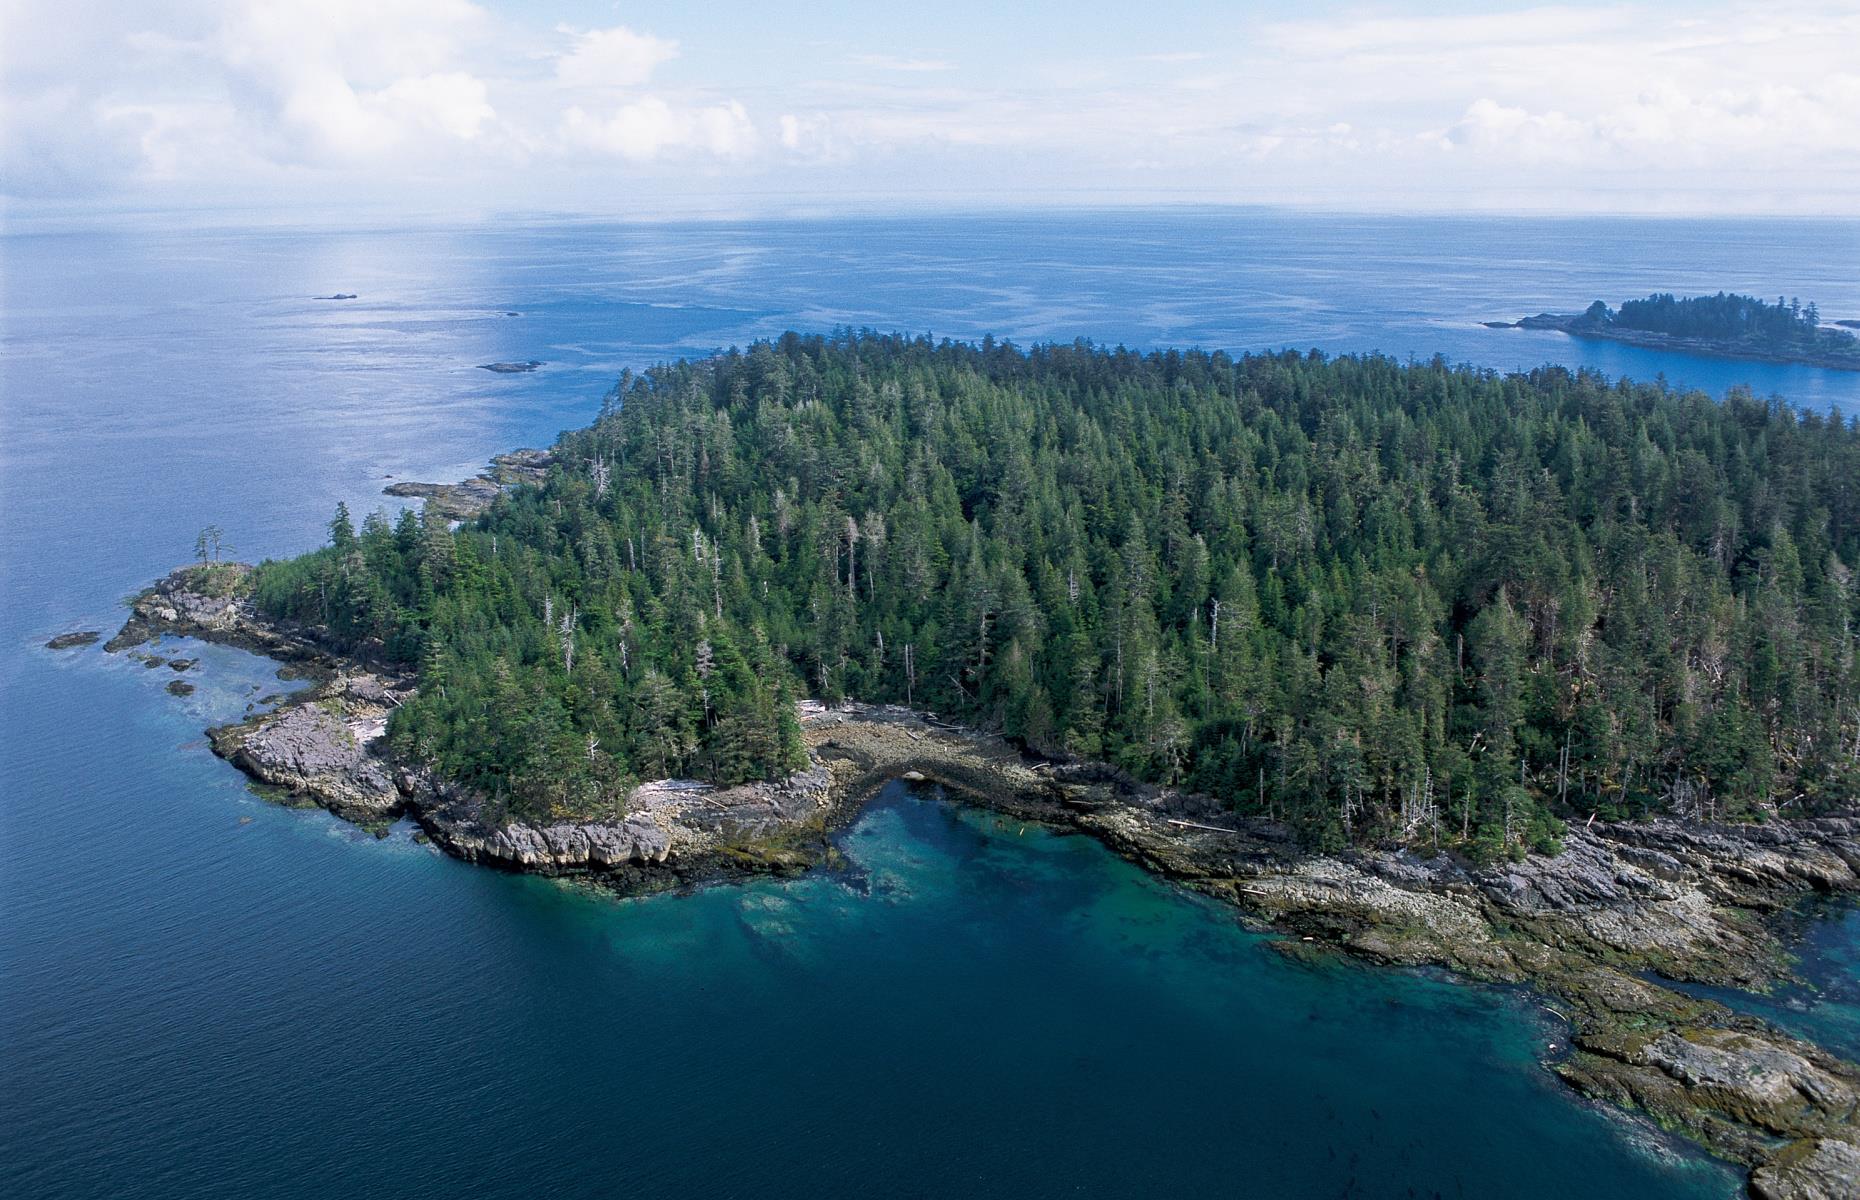 <p>Further north up the British Columbia coast sits Haida Gwaii, a chain of islands that's home to the Haida people. In addition to ancient rainforests and waters teeming with wildlife, the <a href="https://parks.canada.ca/pn-np/bc/gwaiihaanas">Gwaii Haanas reserve</a> sits on 1,800 wild undeveloped islands and islets. It acts as a living museum – its historic Haida village sites feature weathered totem poles, partially-carved canoes and the remnants of longhouses. Visitors can explore the sites by kayak while looking out for humpback whales.</p>